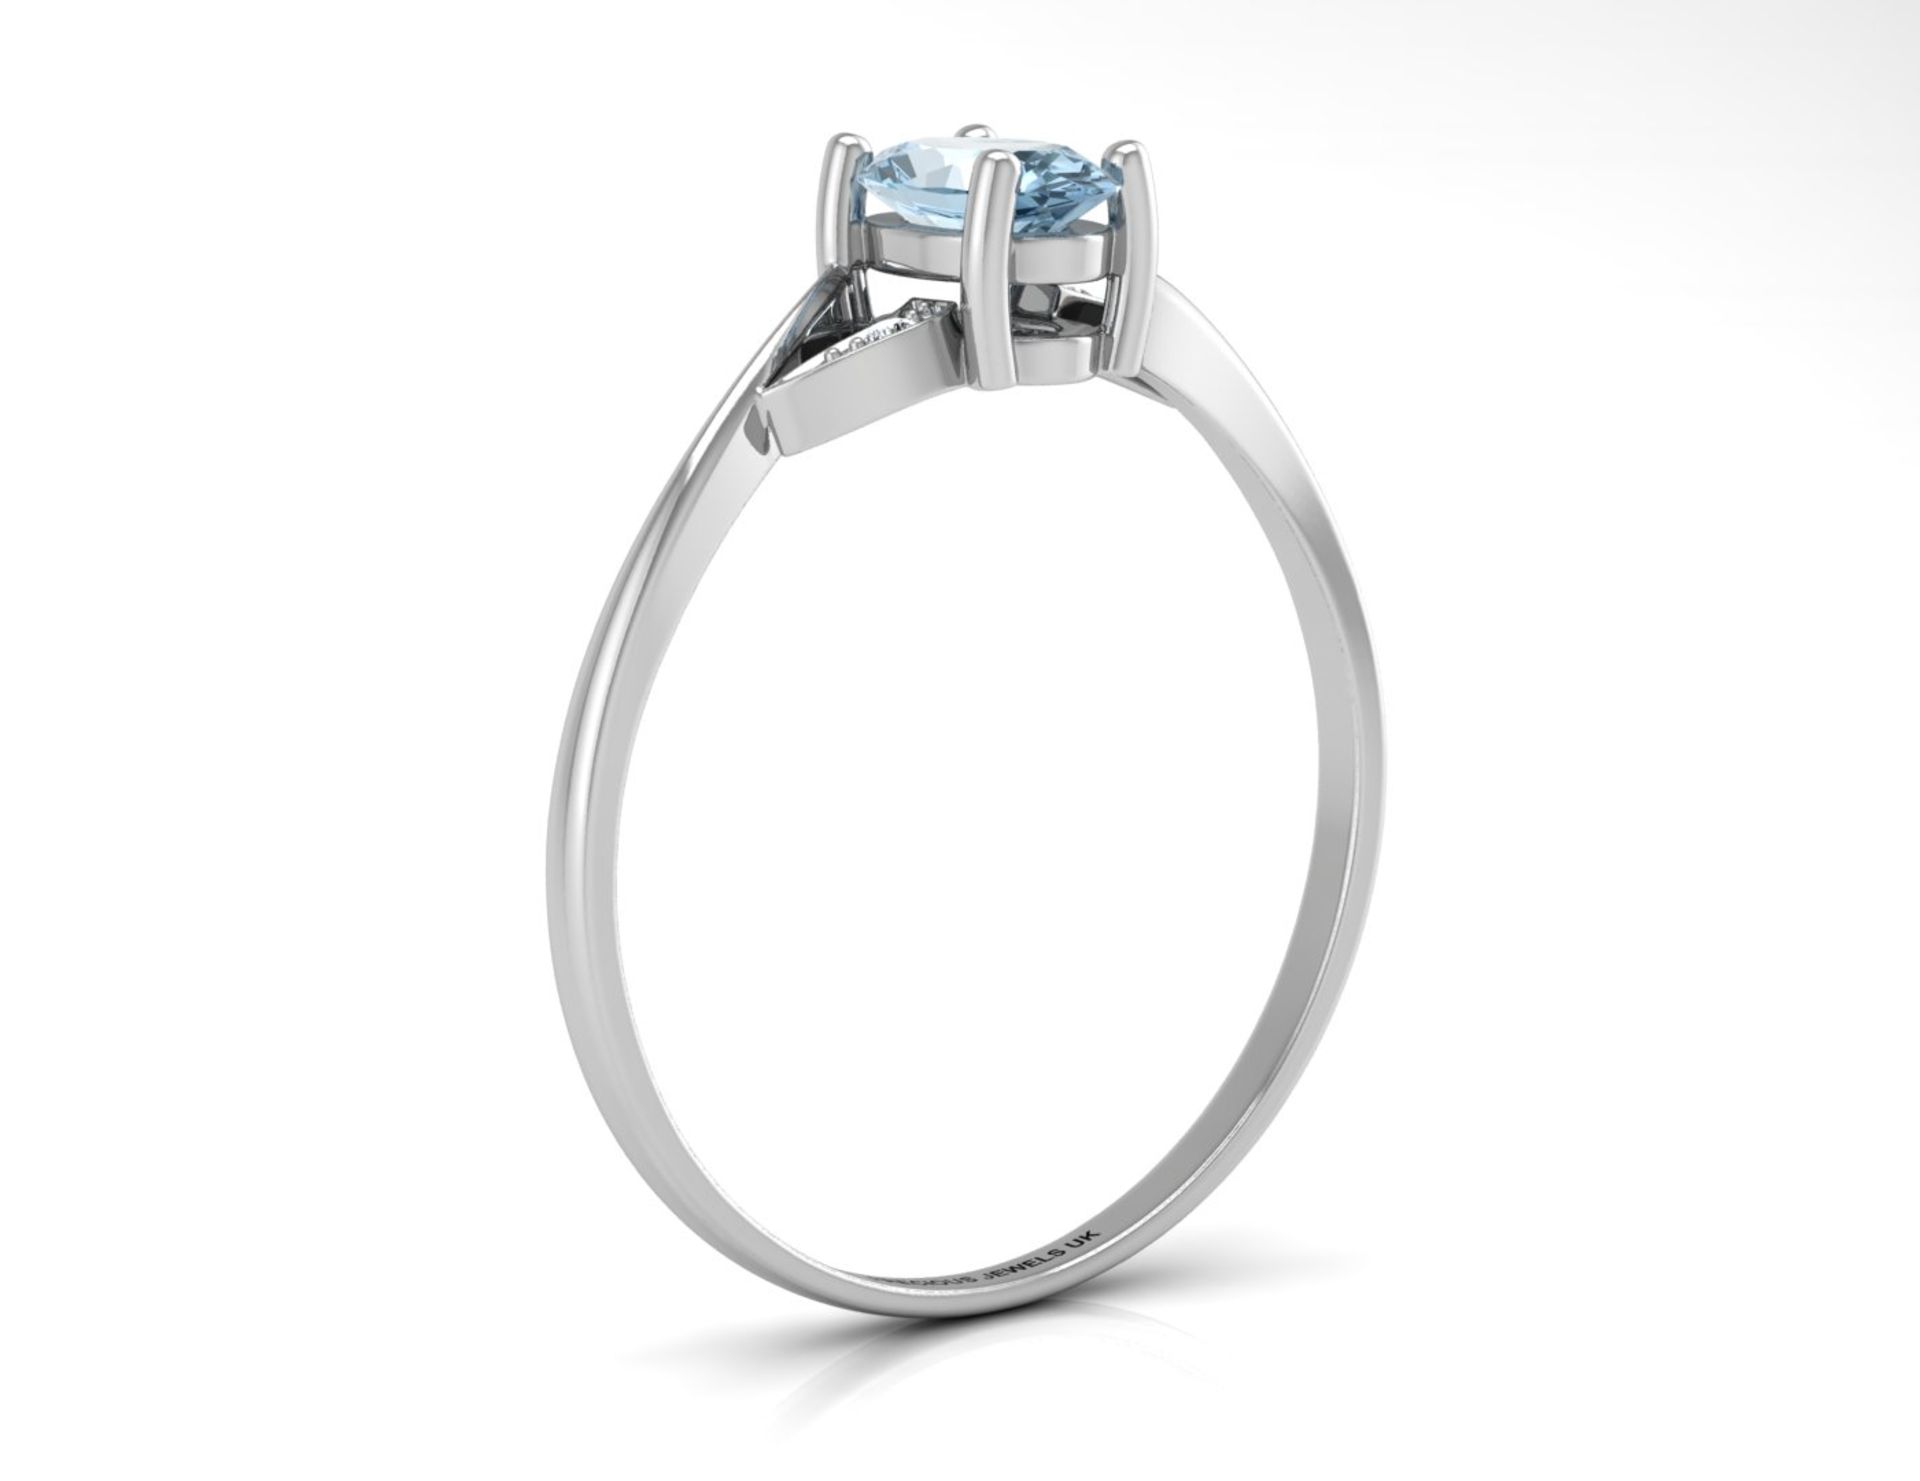 ***£745.00*** UNUSED - Certified by GIE 9ct White Gold Diamond And Blue Topaz Ring 0.01 Carats, - Image 2 of 5